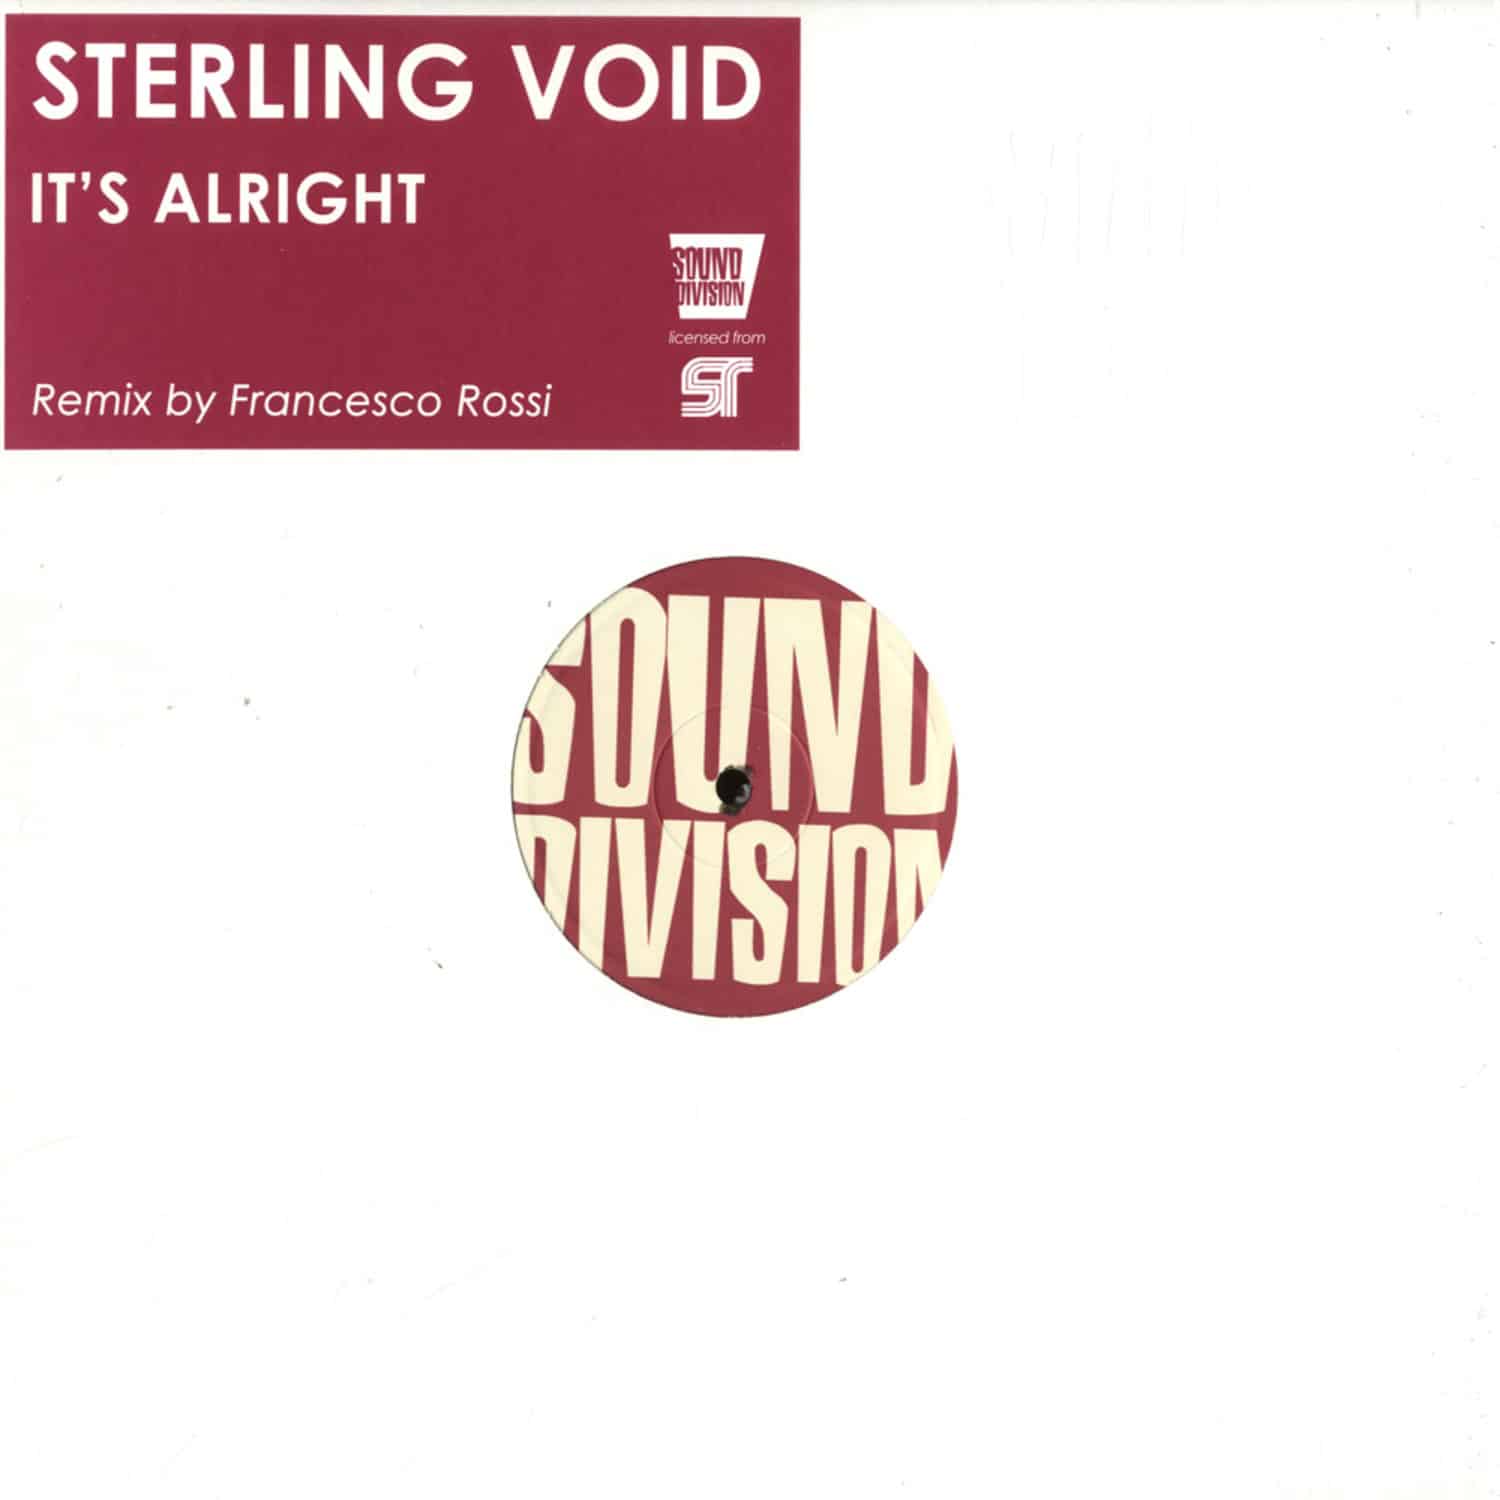 Sterling Void - ITS ALRIGHT